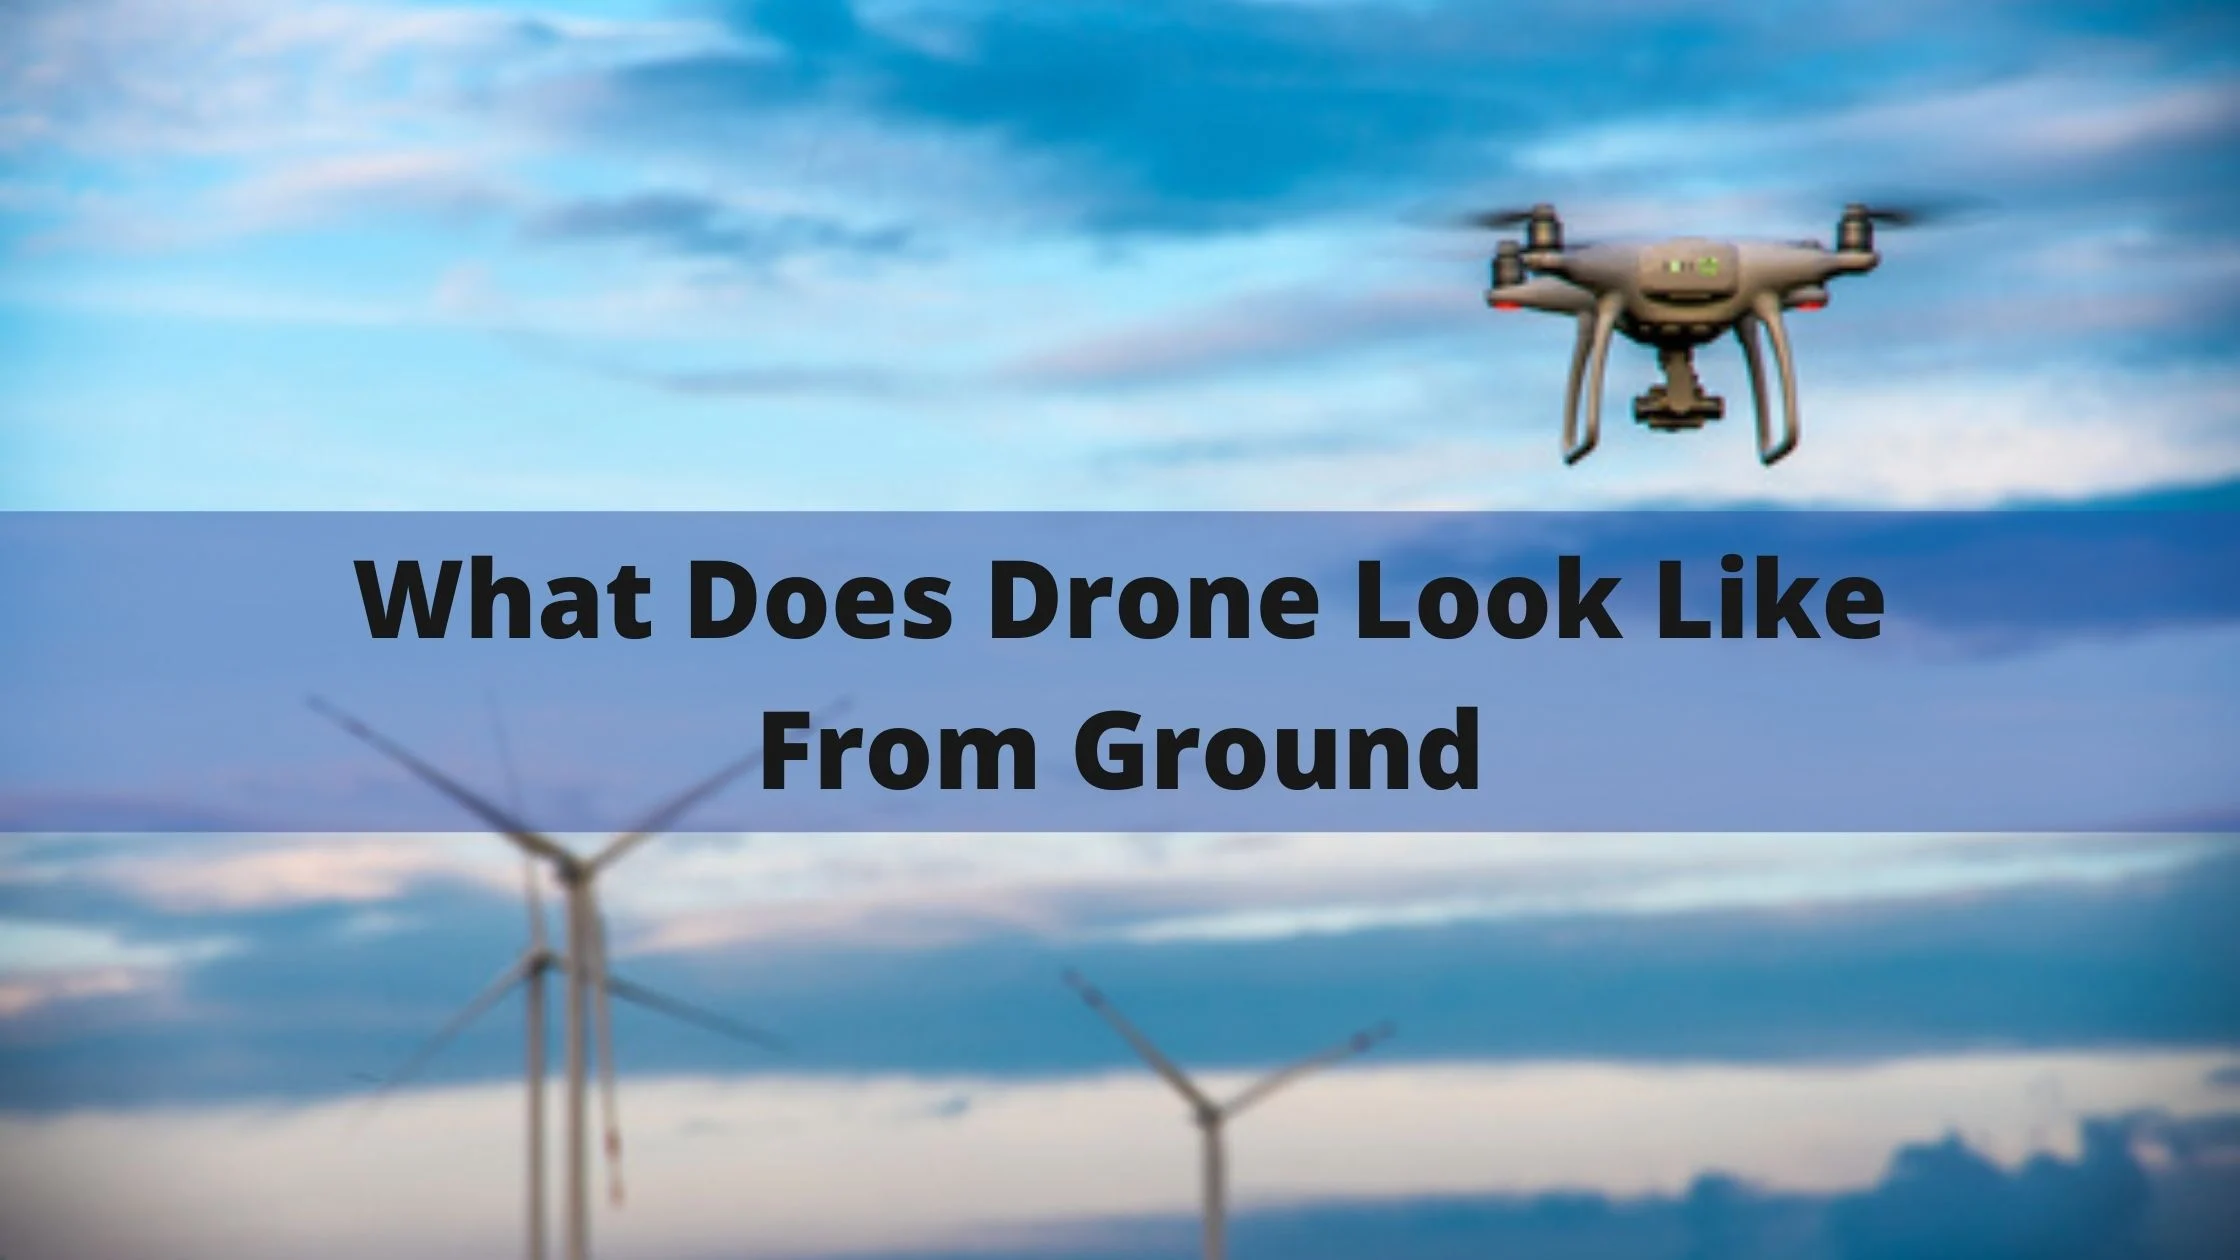 What Does A Drone Look Like From The Ground?